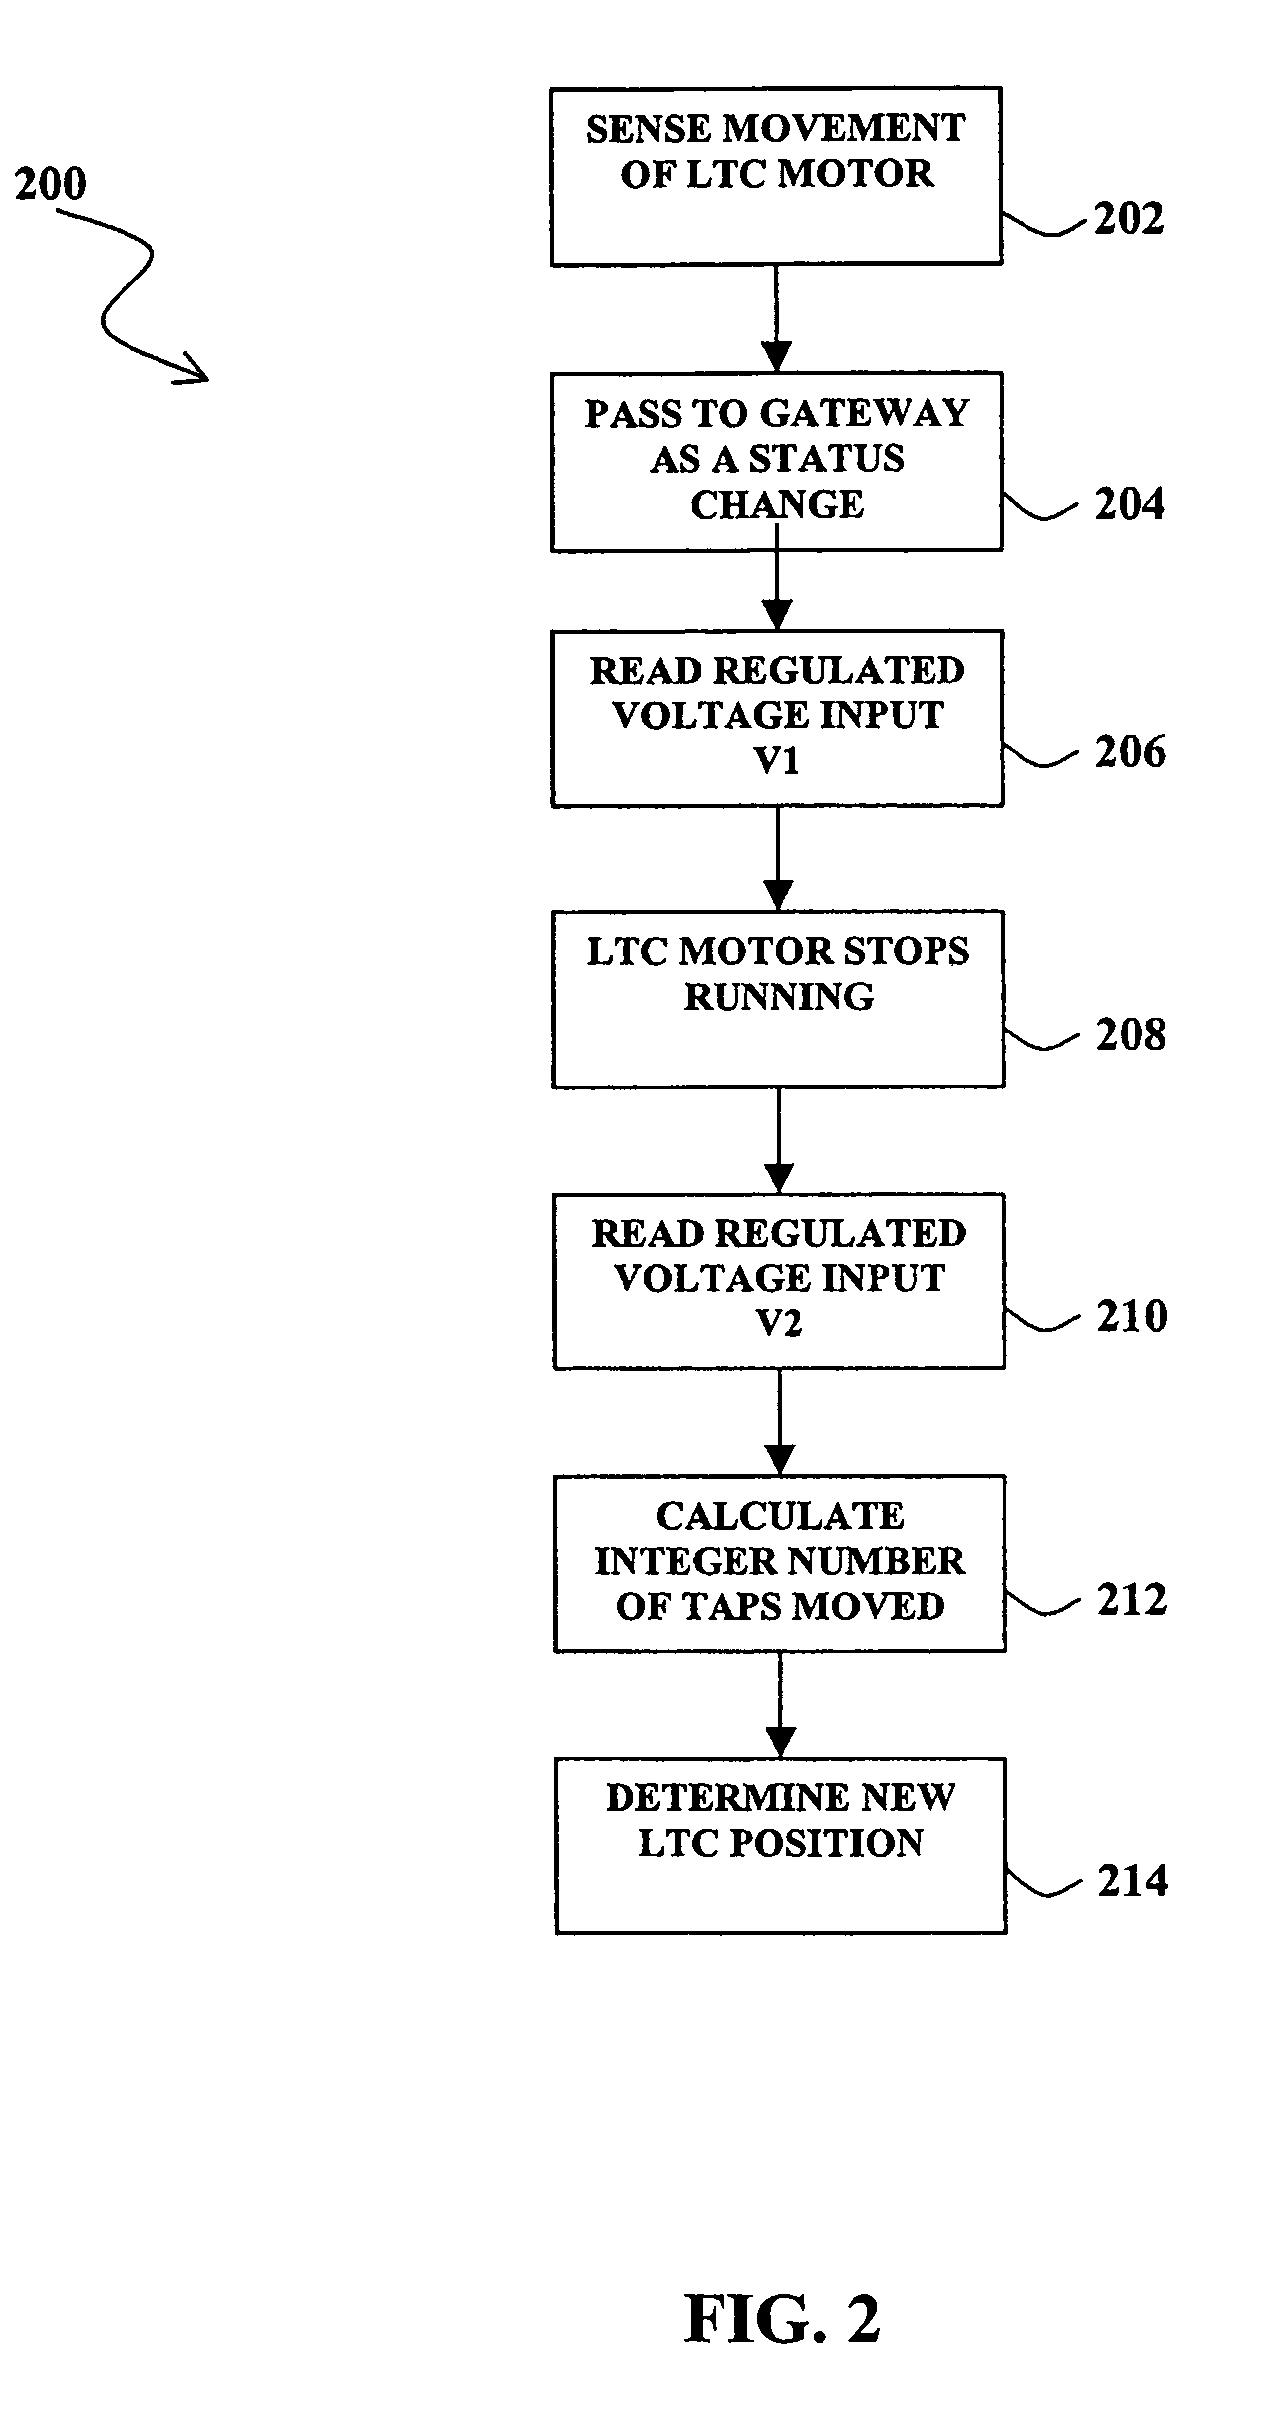 Load tap change monitoring system and method